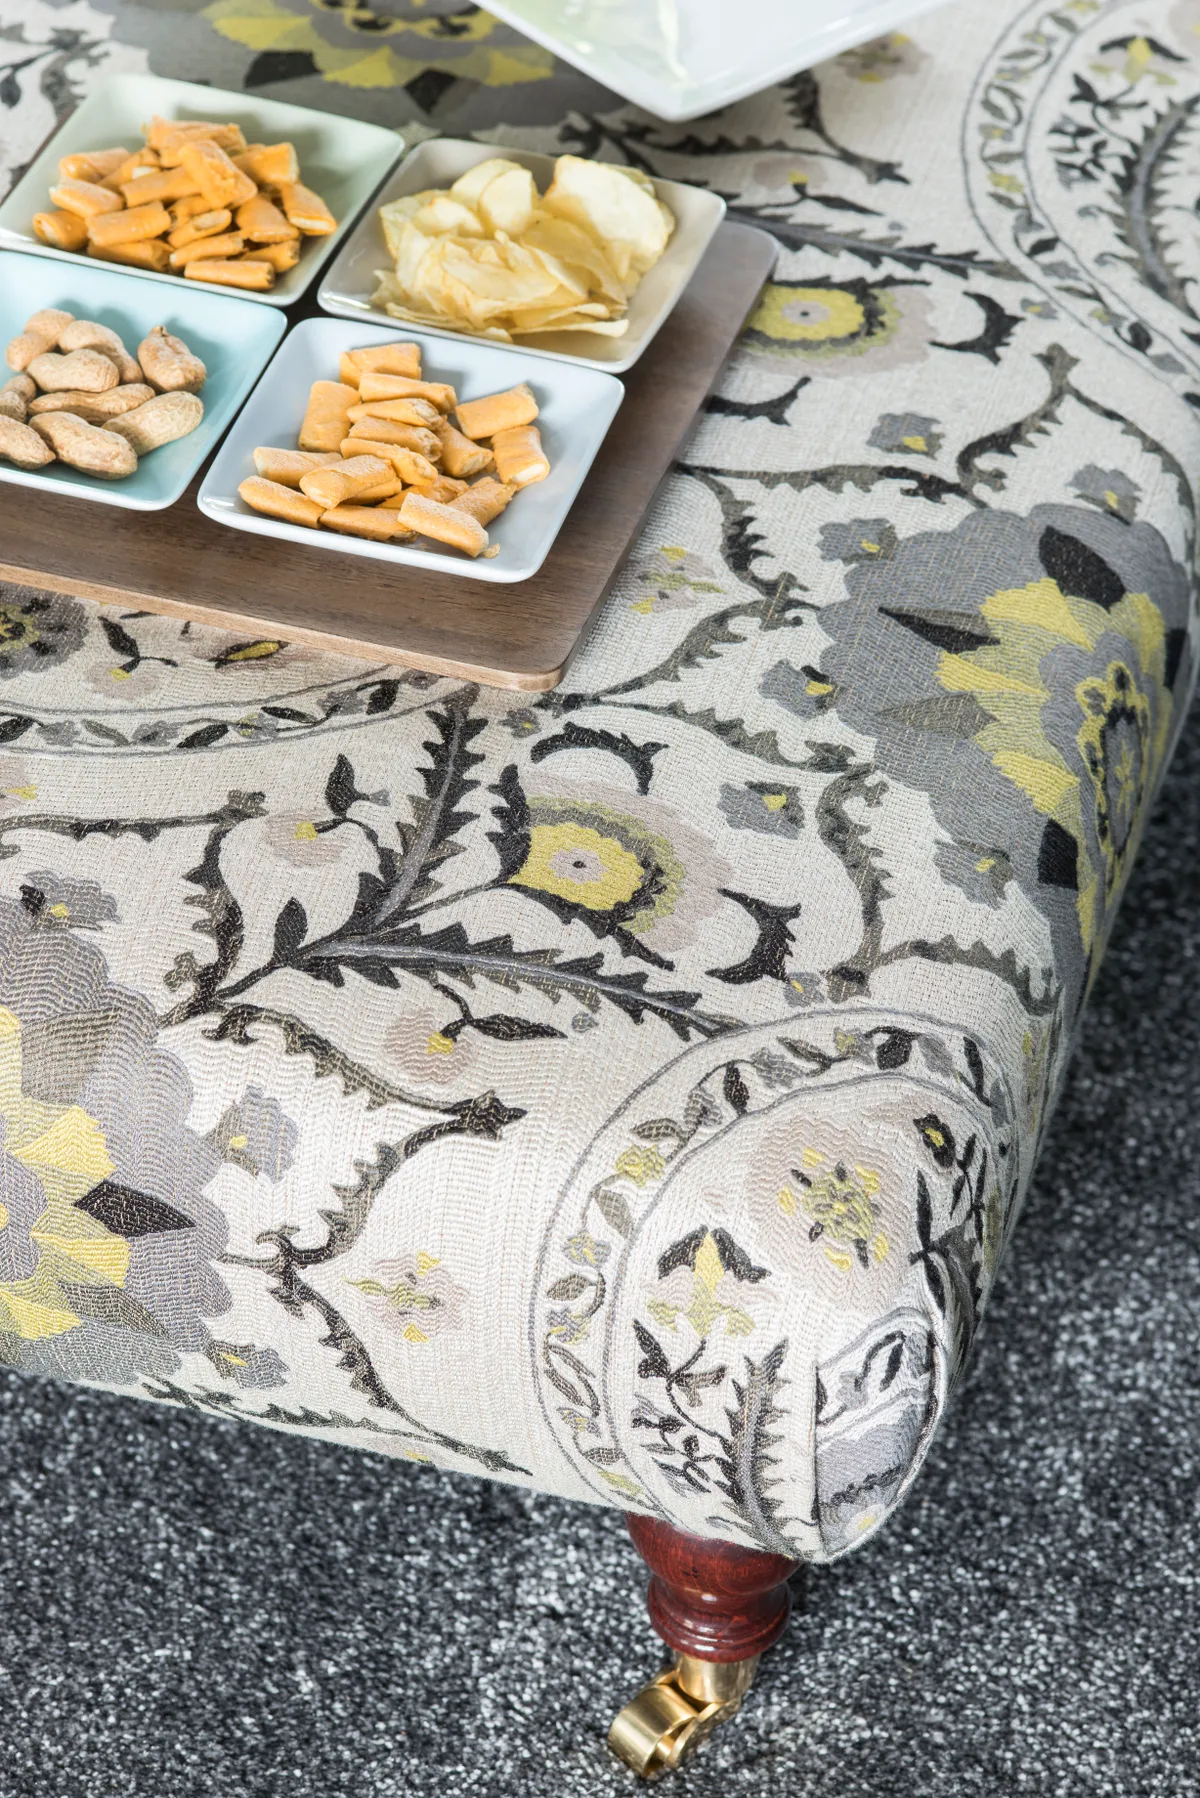 Good idea! Make more of a footstool by turning it into a small table for drinks and snacks – cover it in a fabric that matches the colour scheme to help tie it in with the rest of the décor